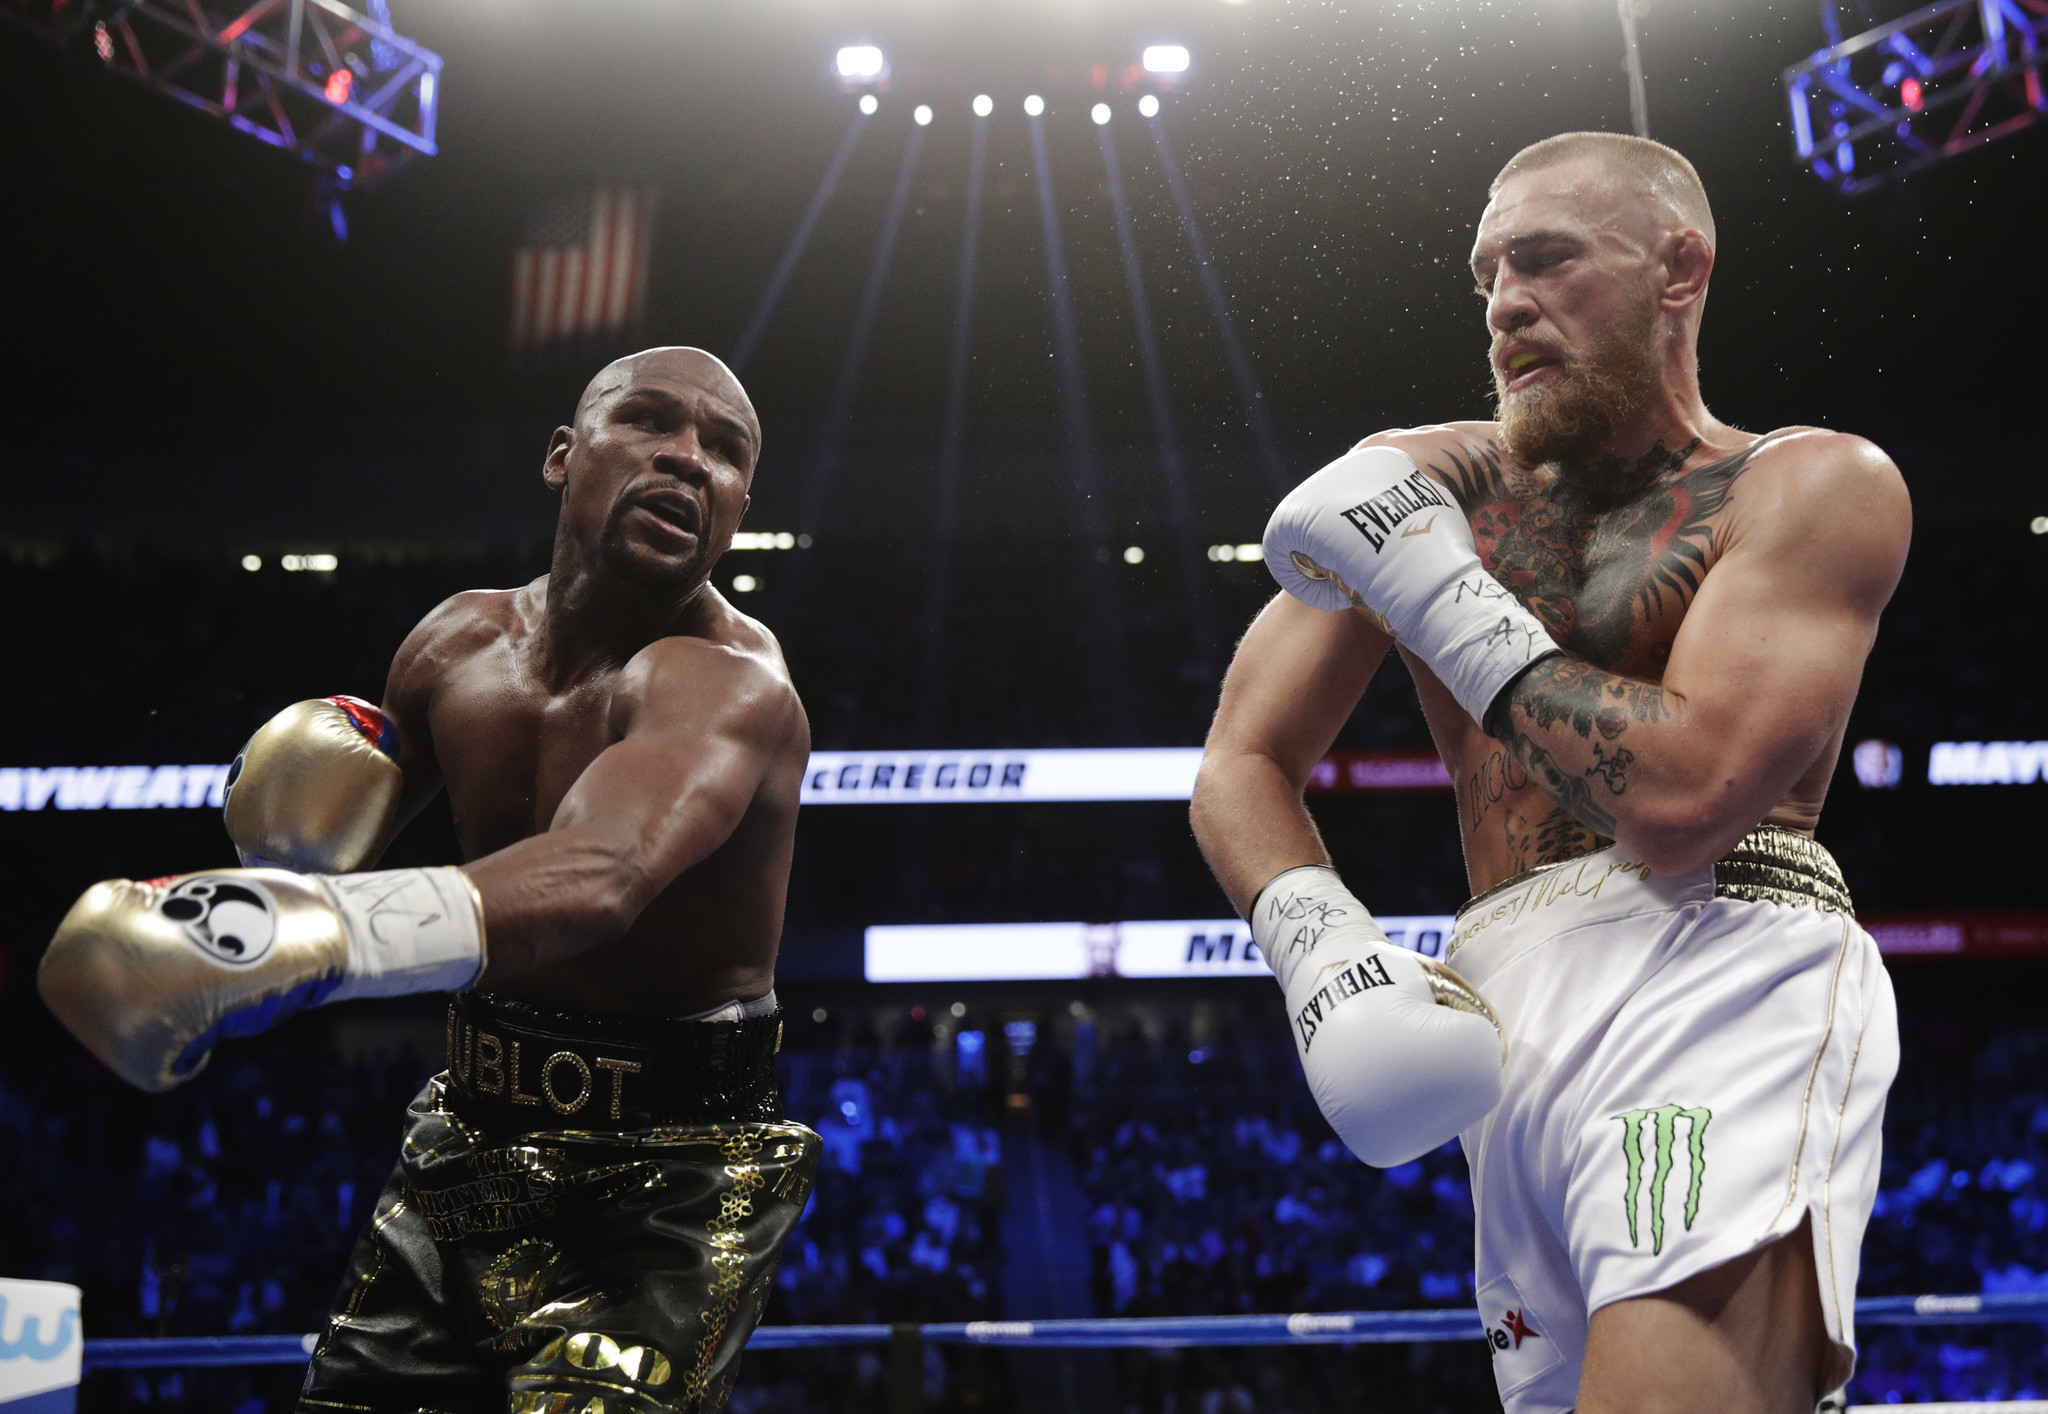 Floyd Mayweather defeats Conor McGregor in widely anticipated boxing match - Chicago ...2048 x 1414